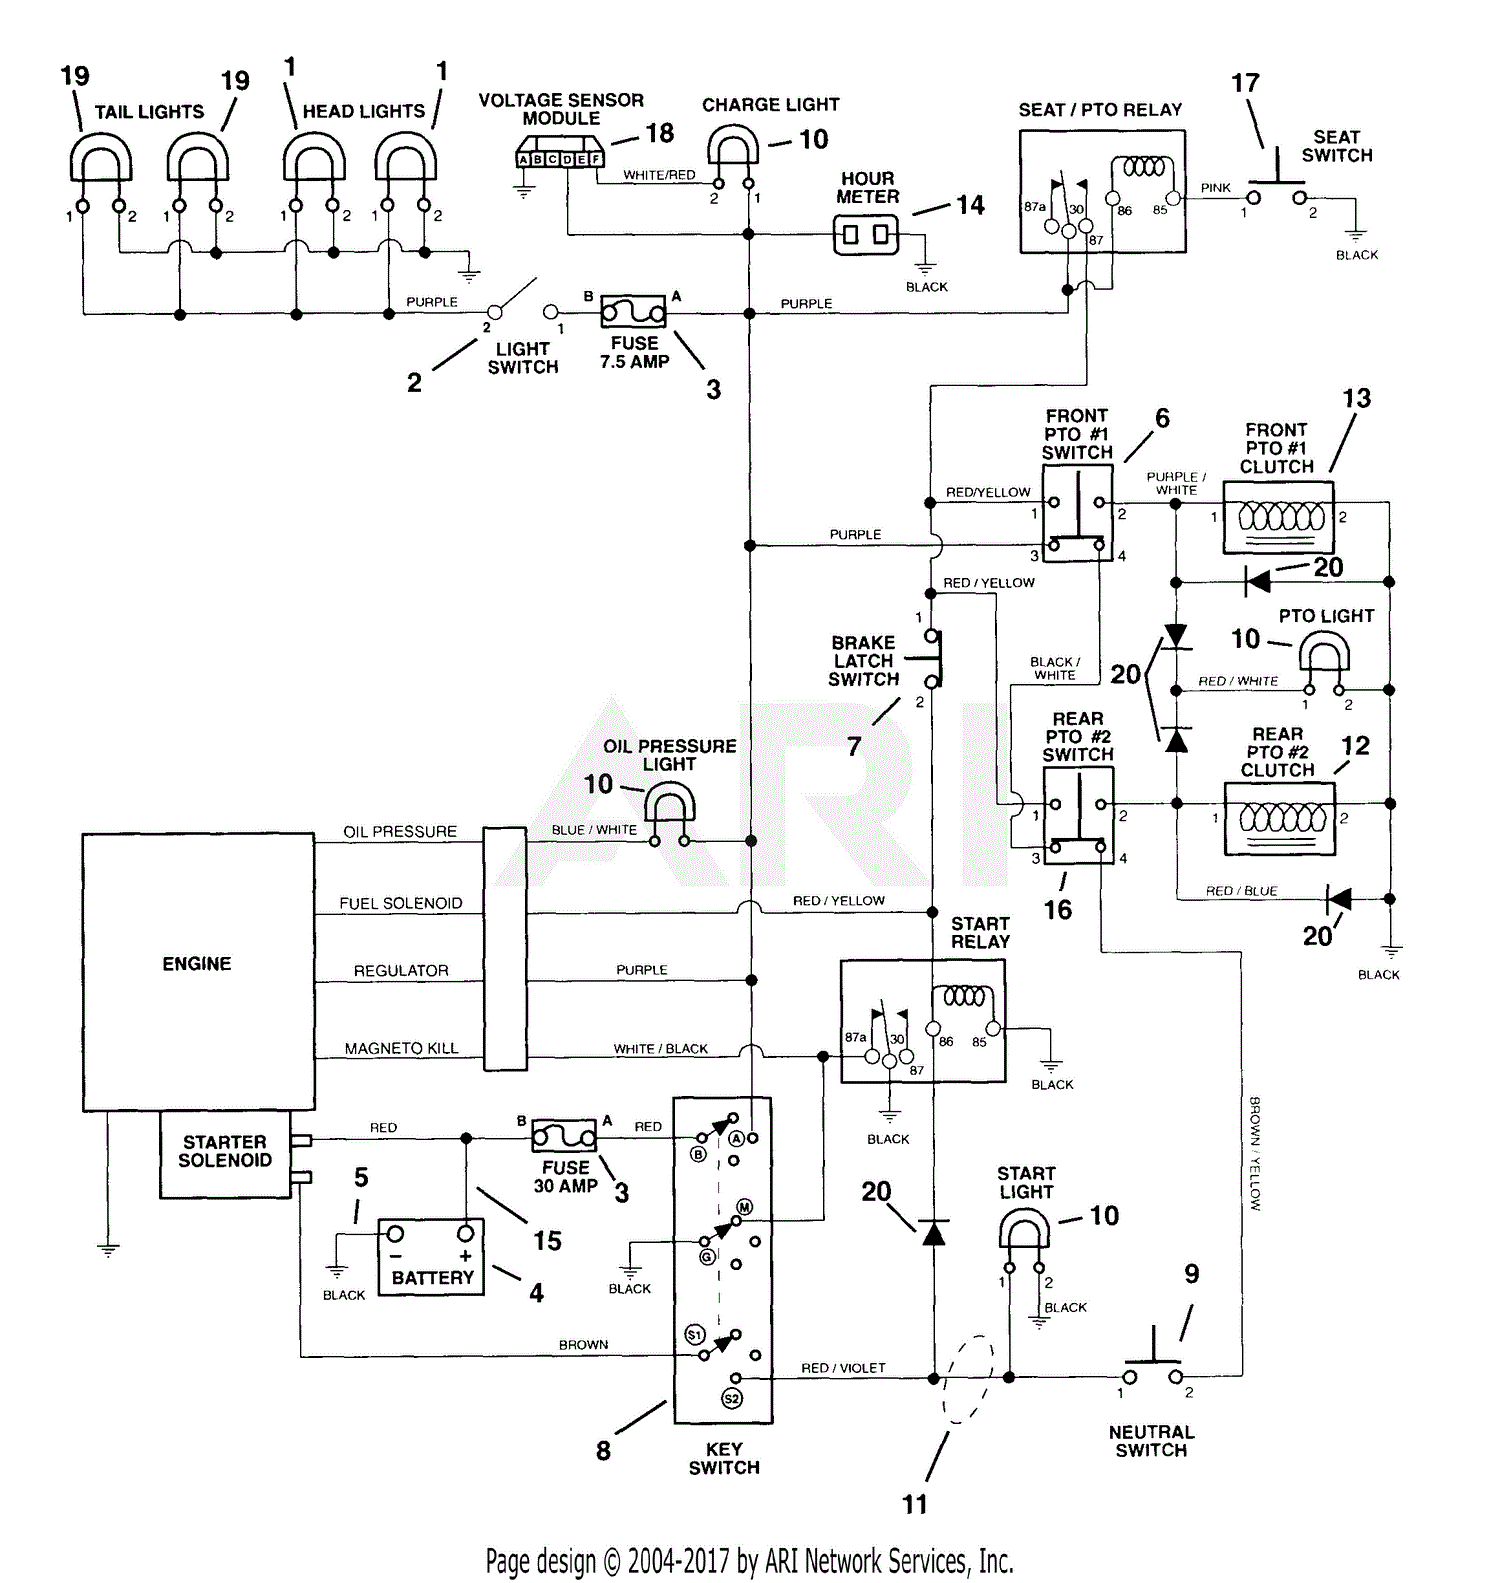 Force 70 Outboard Starter Solenoid Wiring Diagram from schematron.org